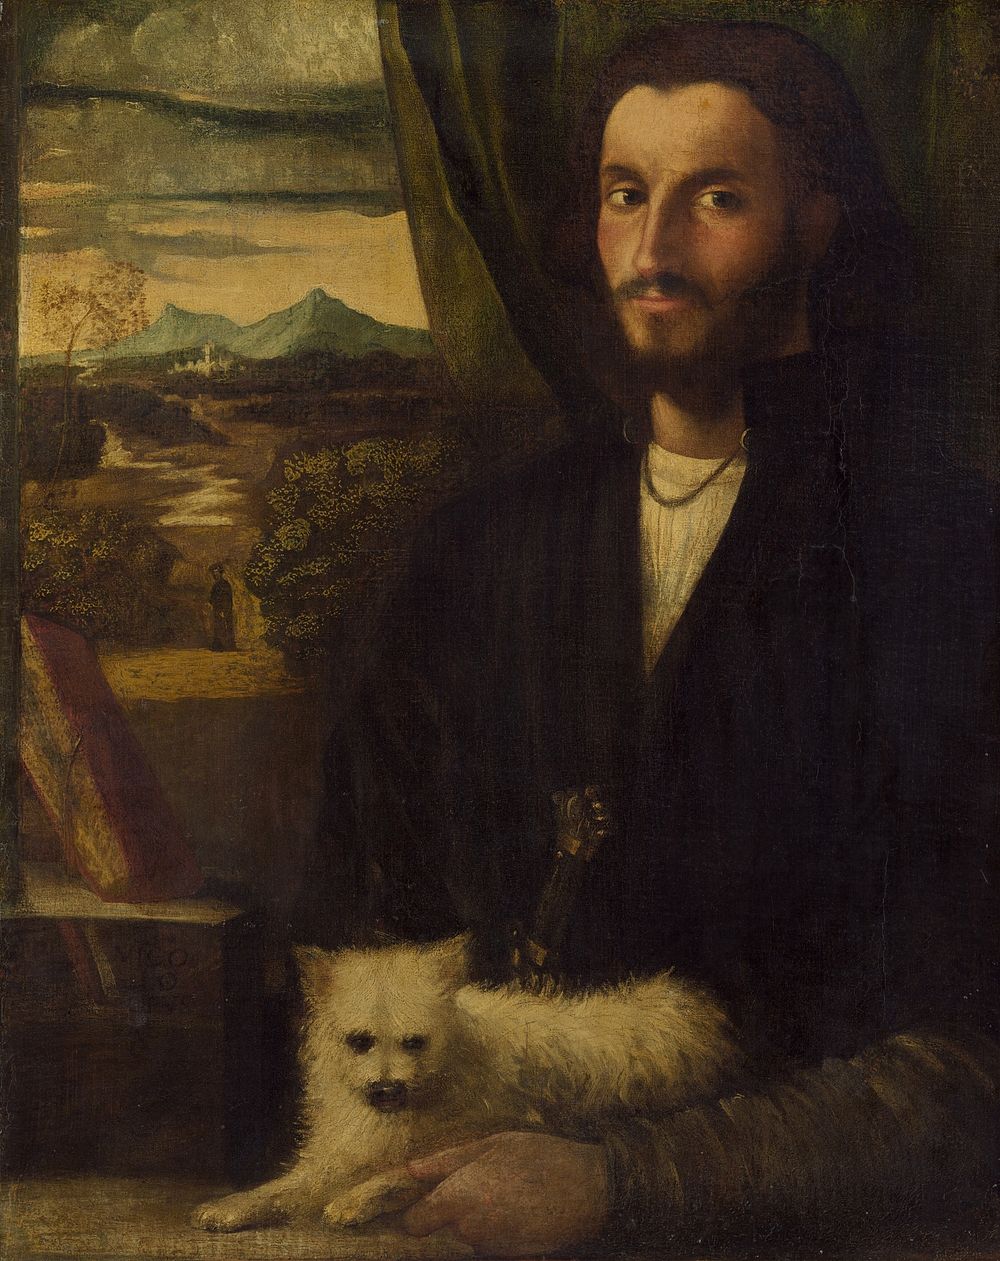 Portrait of a Man with a Dog (ca. 1520) by Cariani.  